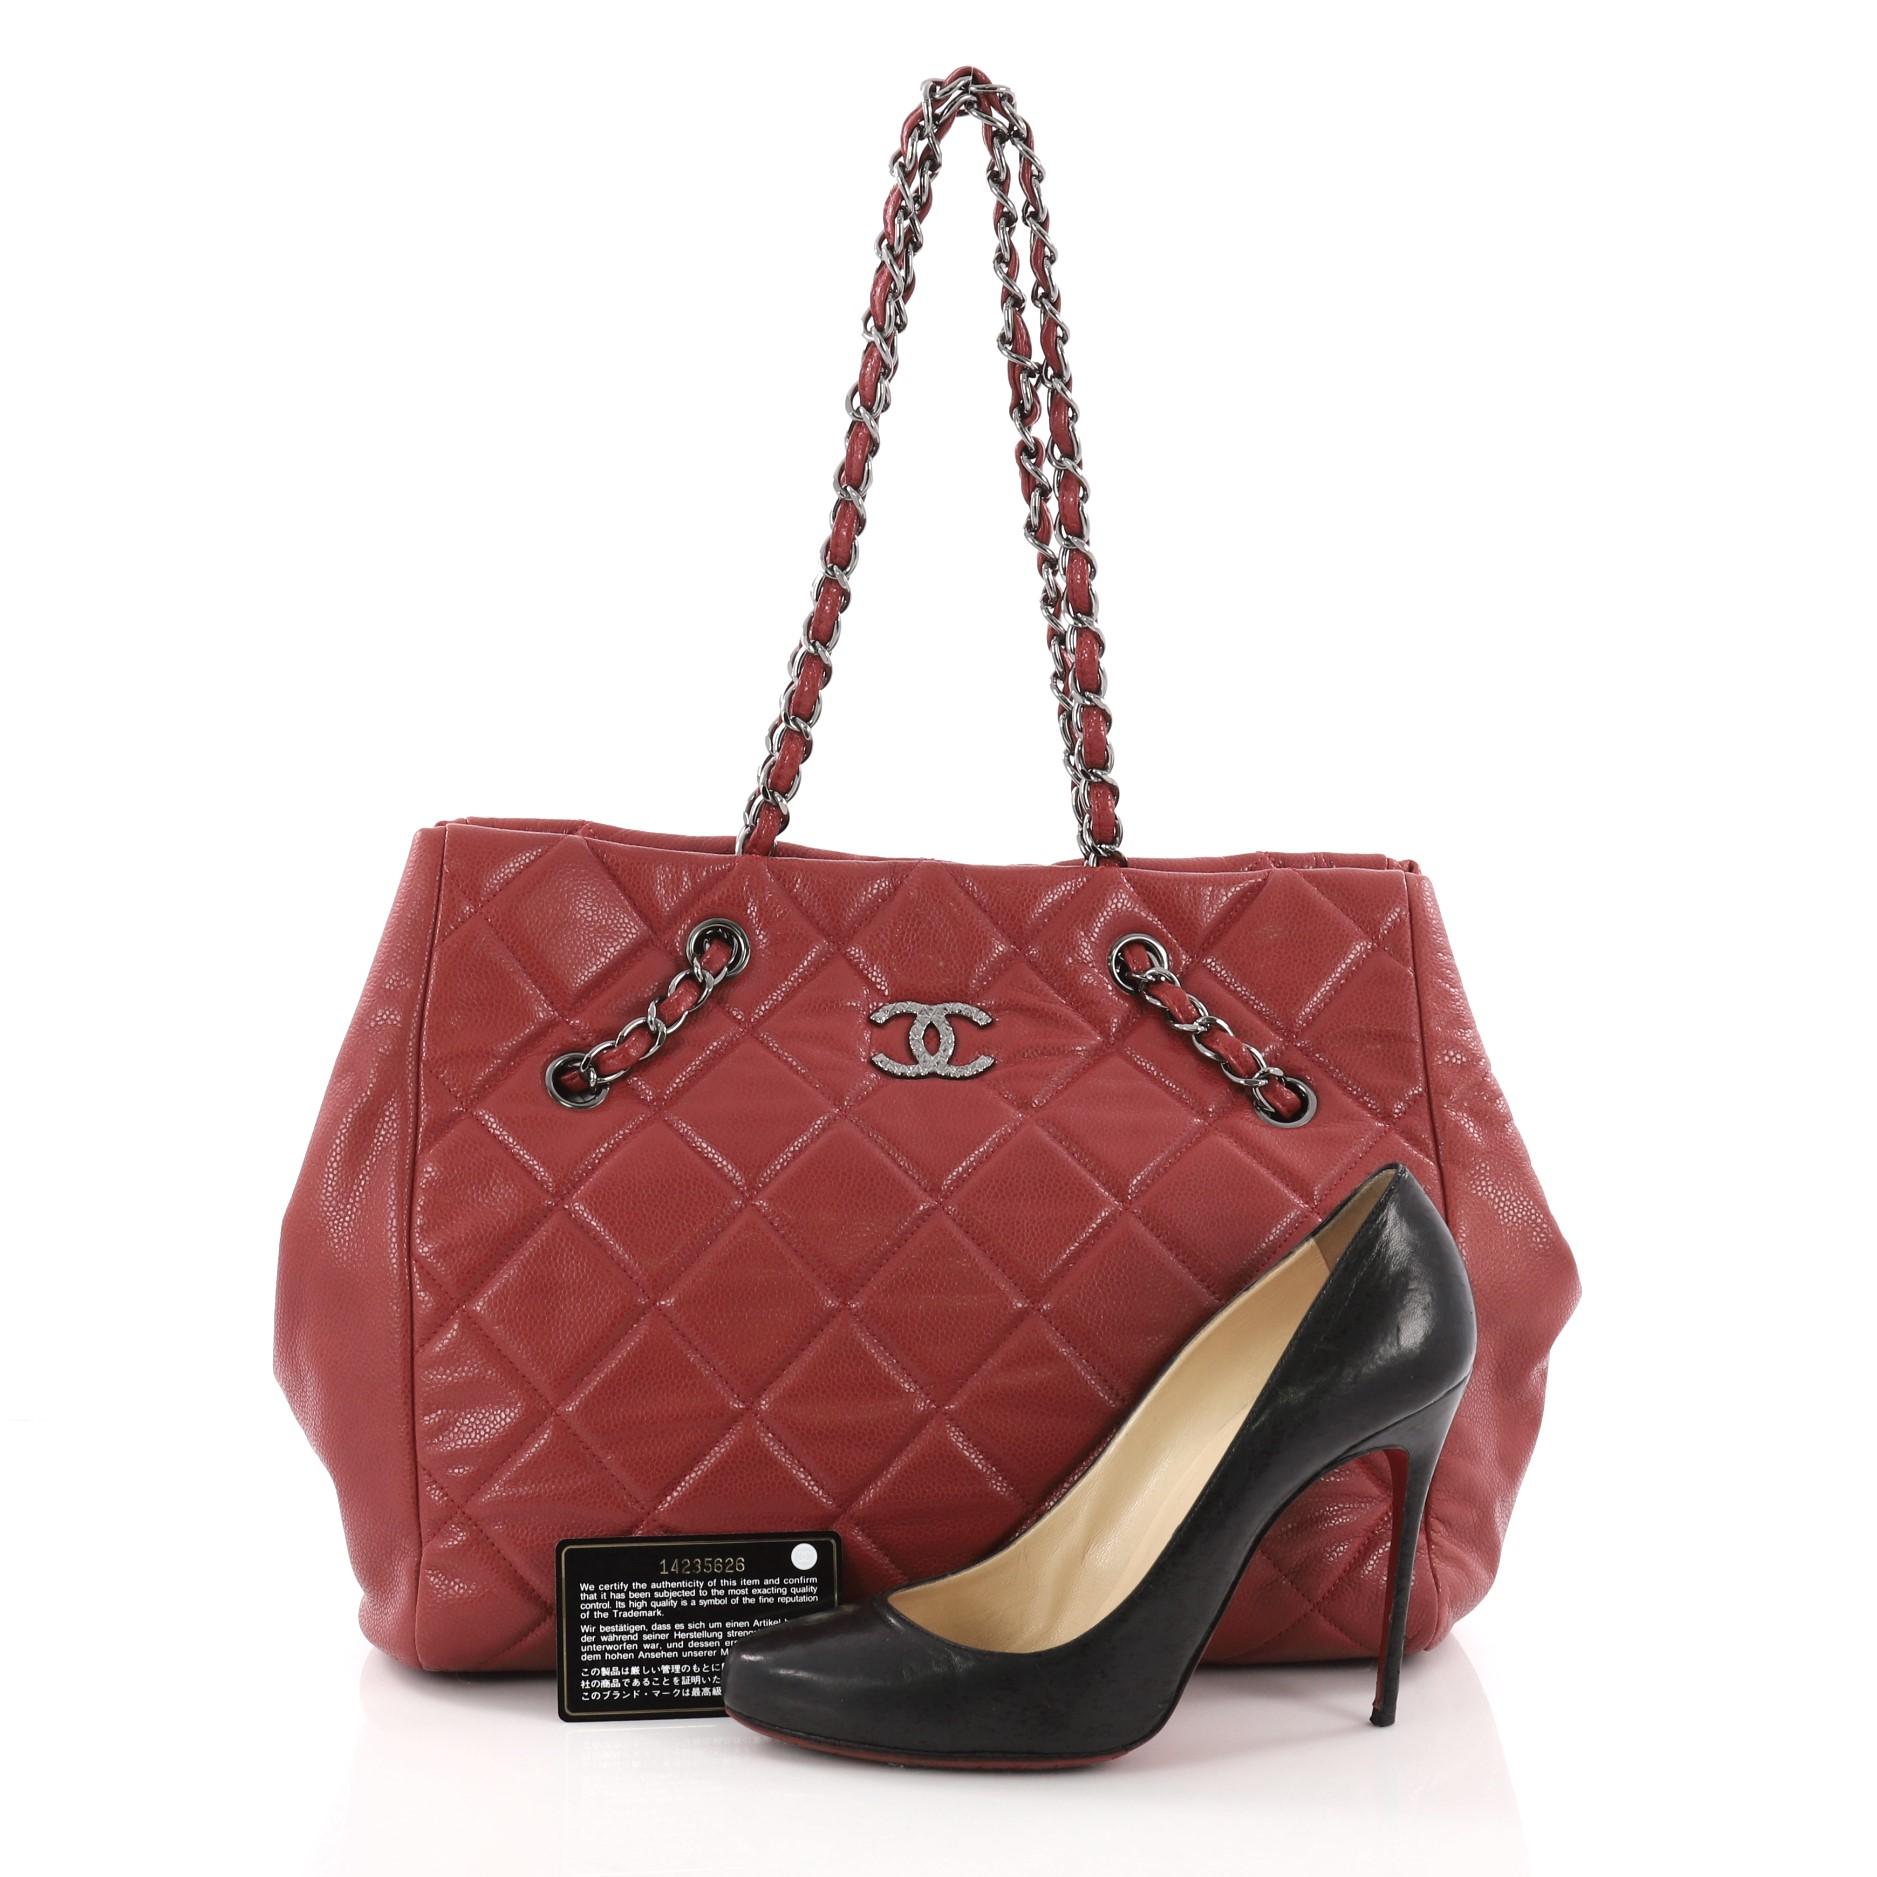 This Chanel Cells Tote Quilted Caviar Large, crafted in red quilted caviar leather, features woven-in leather chain strap, protective base studs and gunmetal-tone hardware. Its accordion style open top showcases a beige fabric interior with zip and